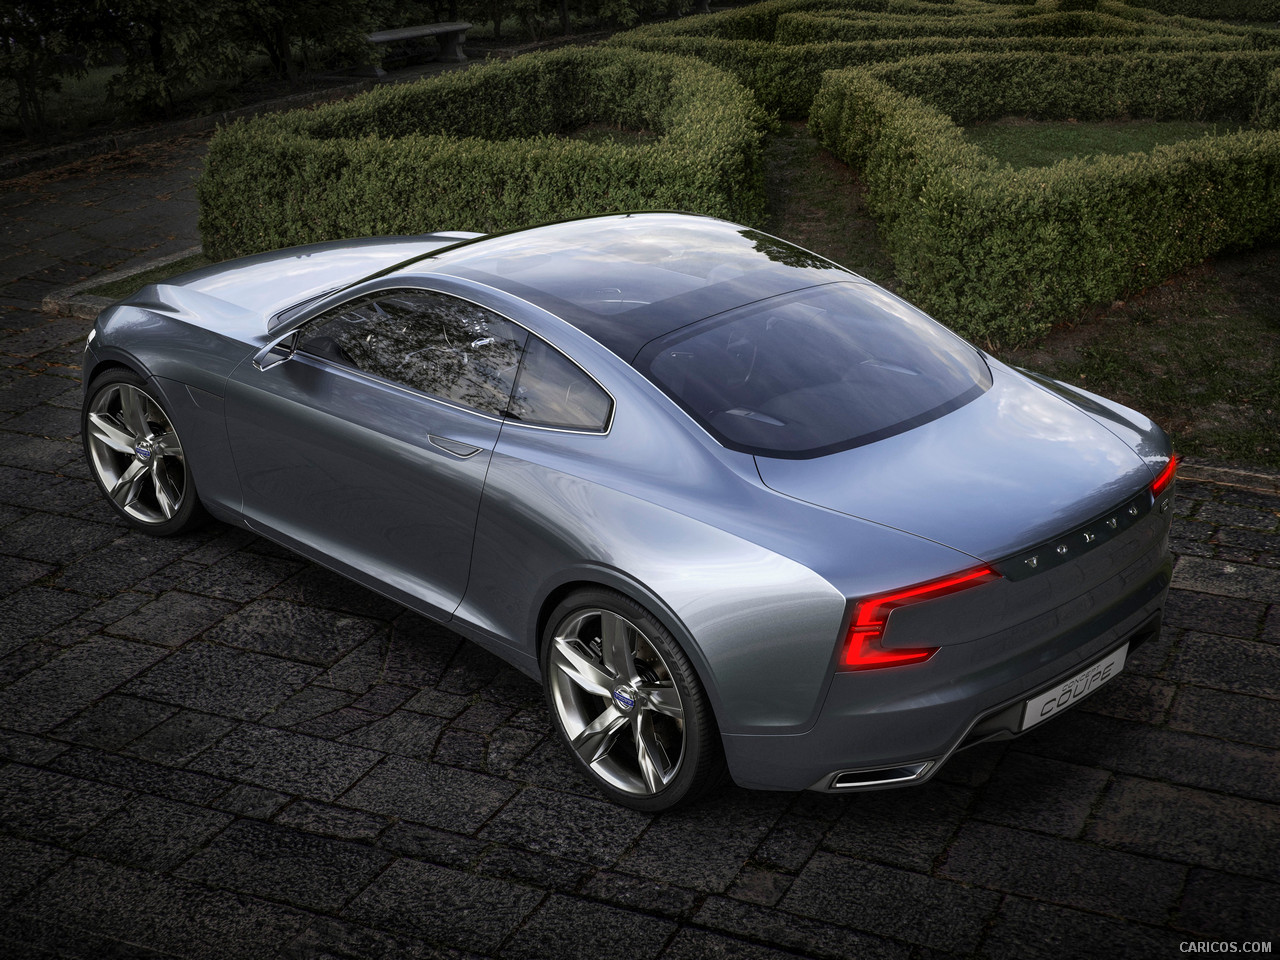 HQ 2013 Volvo Coupe Concept Wallpapers | File 426.16Kb